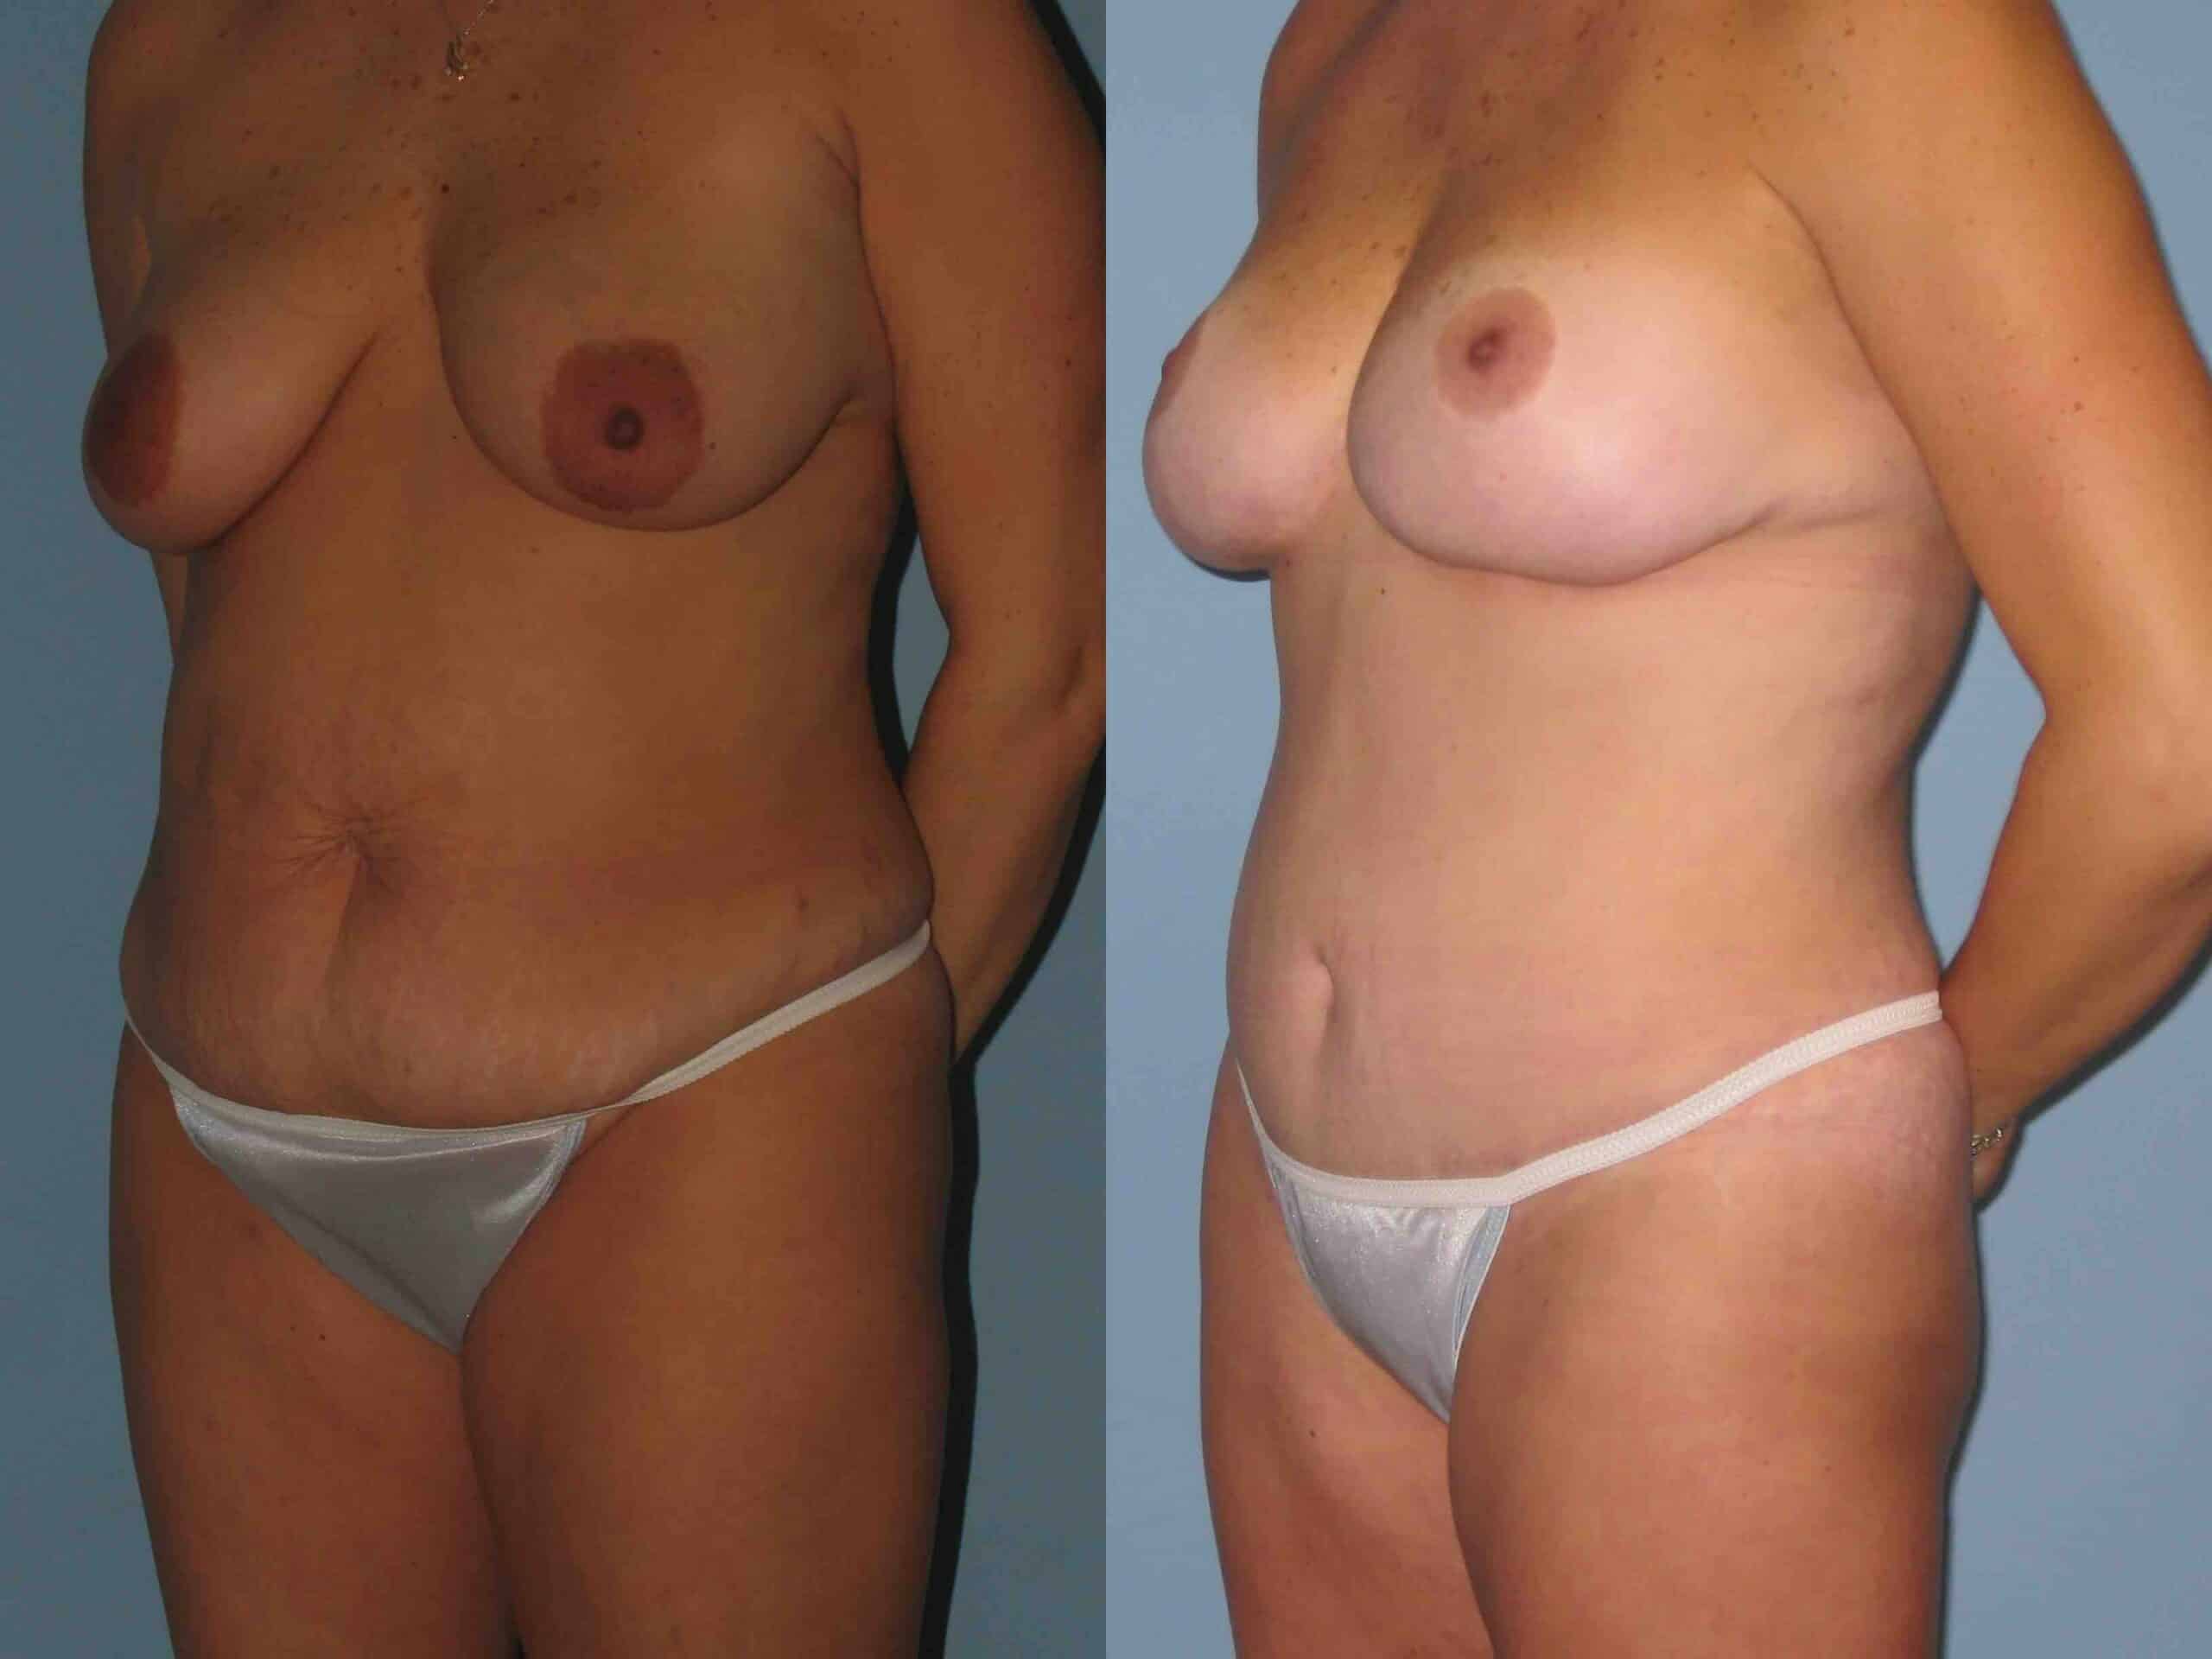 Before and after, patient 2 yr 7 mo post op from VASER Flanks Axilla Back, Breast Lift/Mastopexy, Tummy Tuck procedures performed by Dr. Paul Vanek